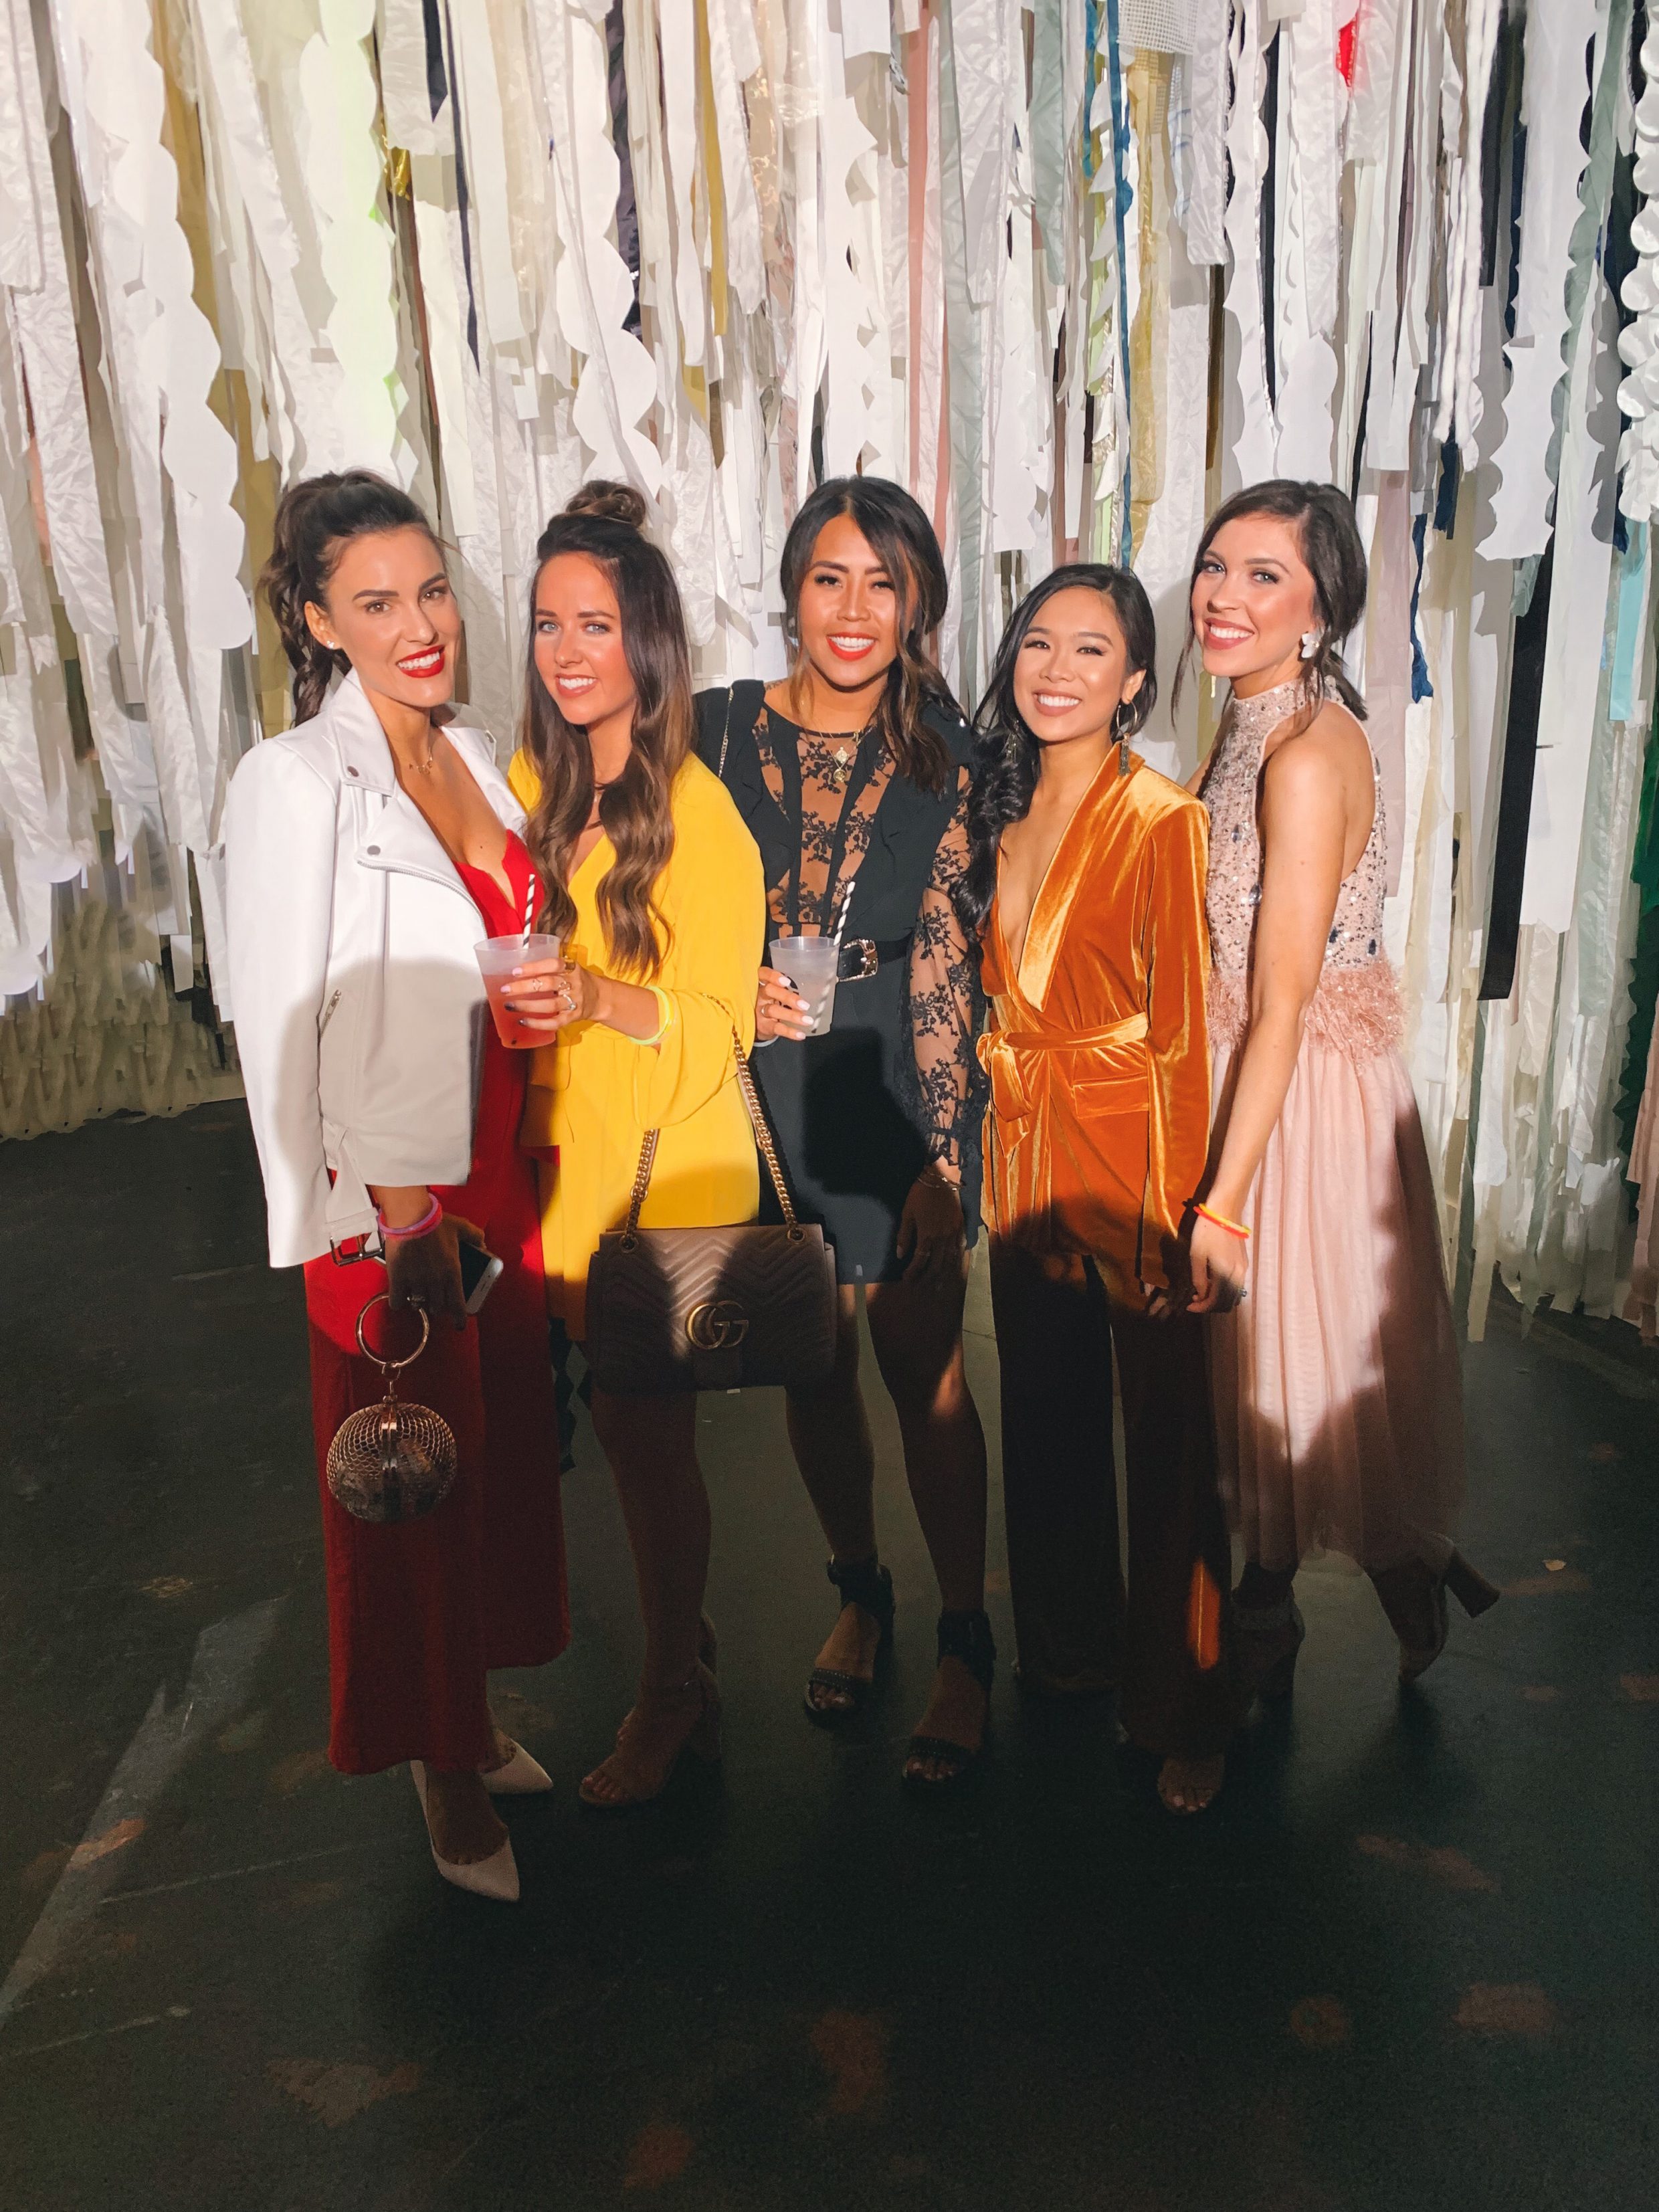 5 Major Takeaways from the rewardStyle Conference - Color & Chic